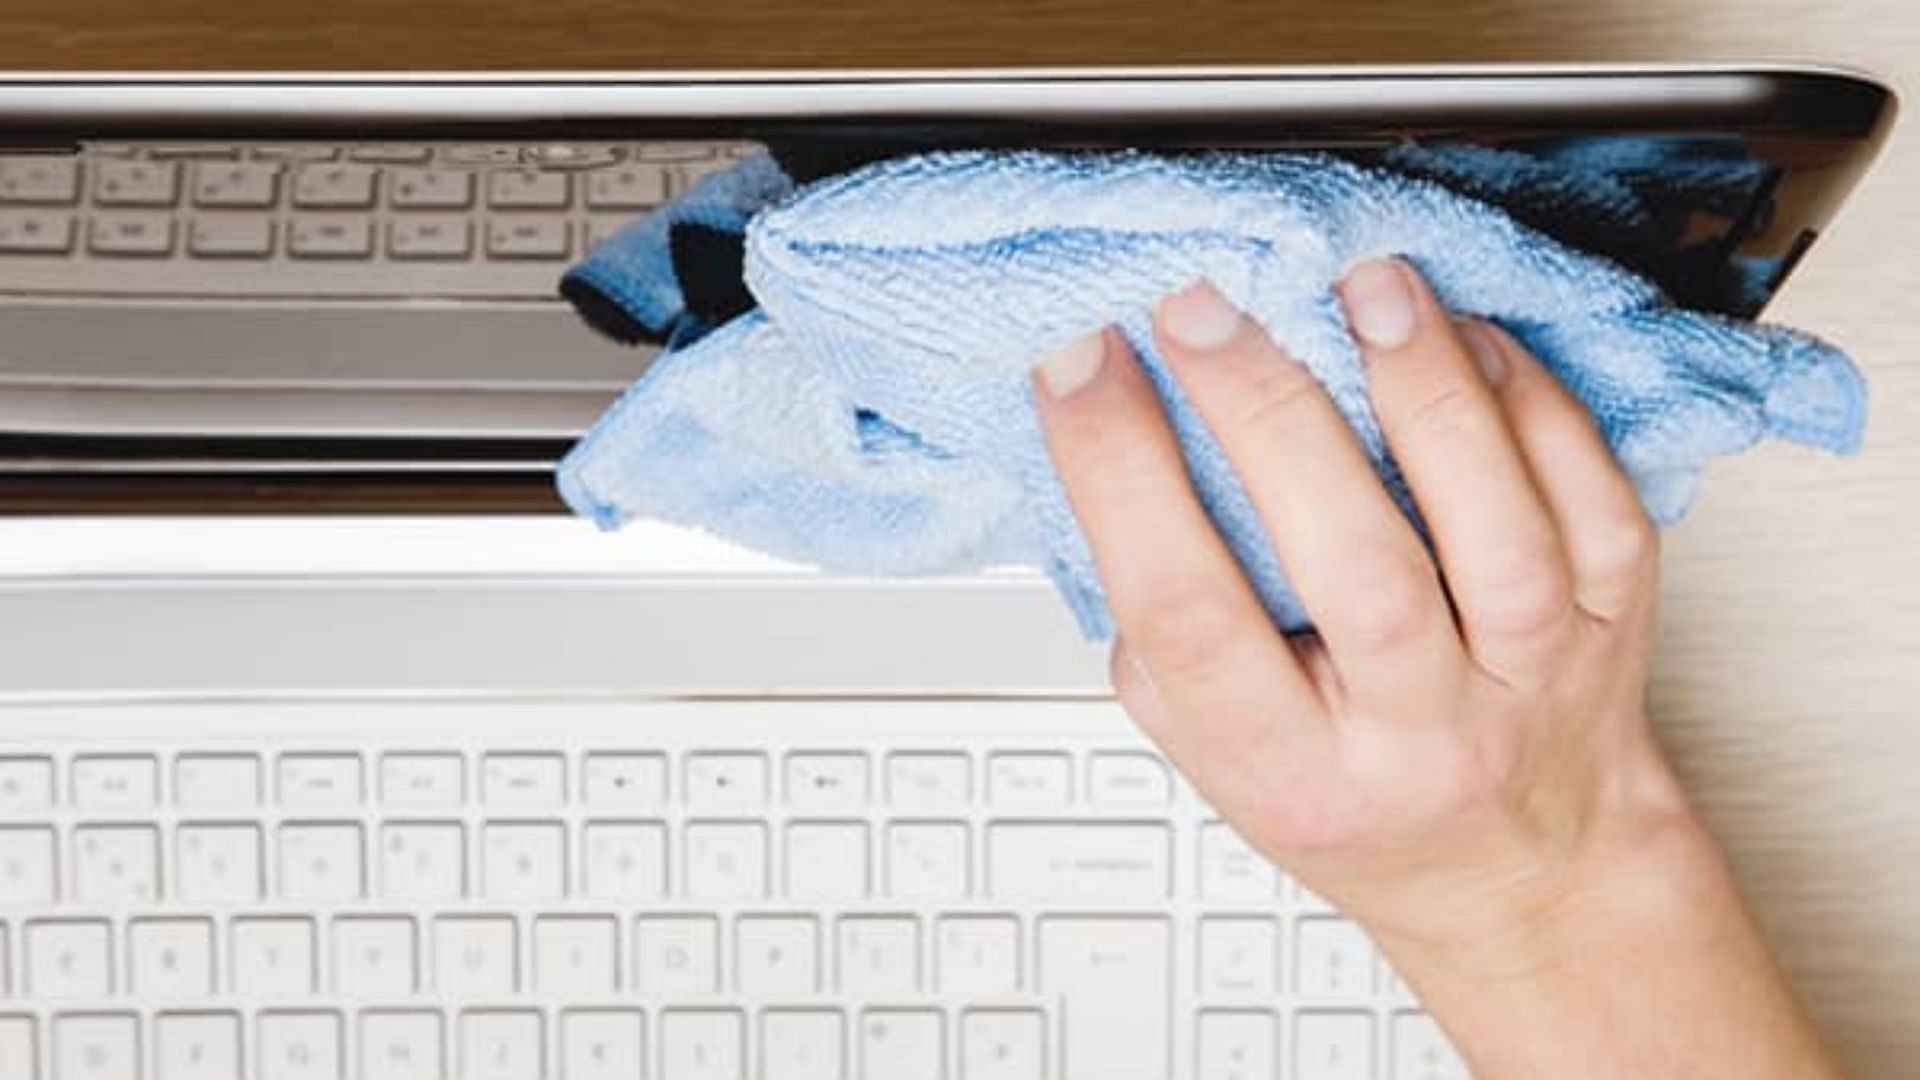 Only use a microfiber cloth to clean the screen (Image via HP)